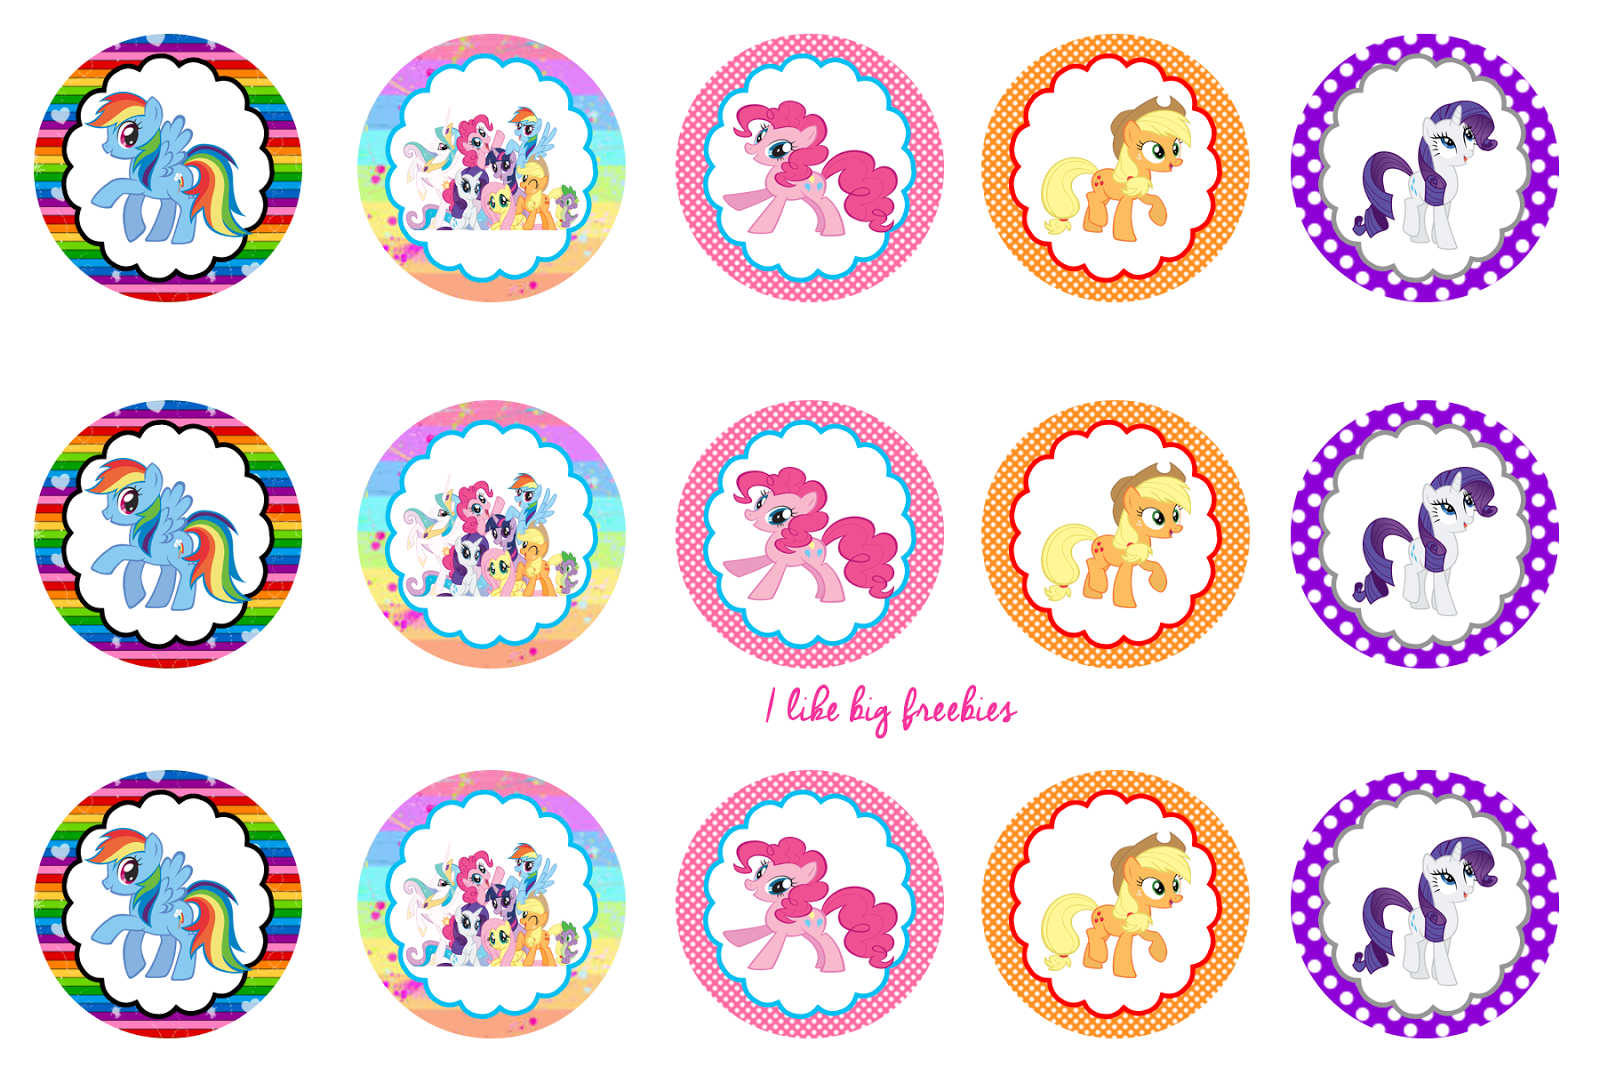 Free Bottle Cap Printables | My Little Pony Cupcake Ideas My Little - Free Printable My Little Pony Cupcake Toppers